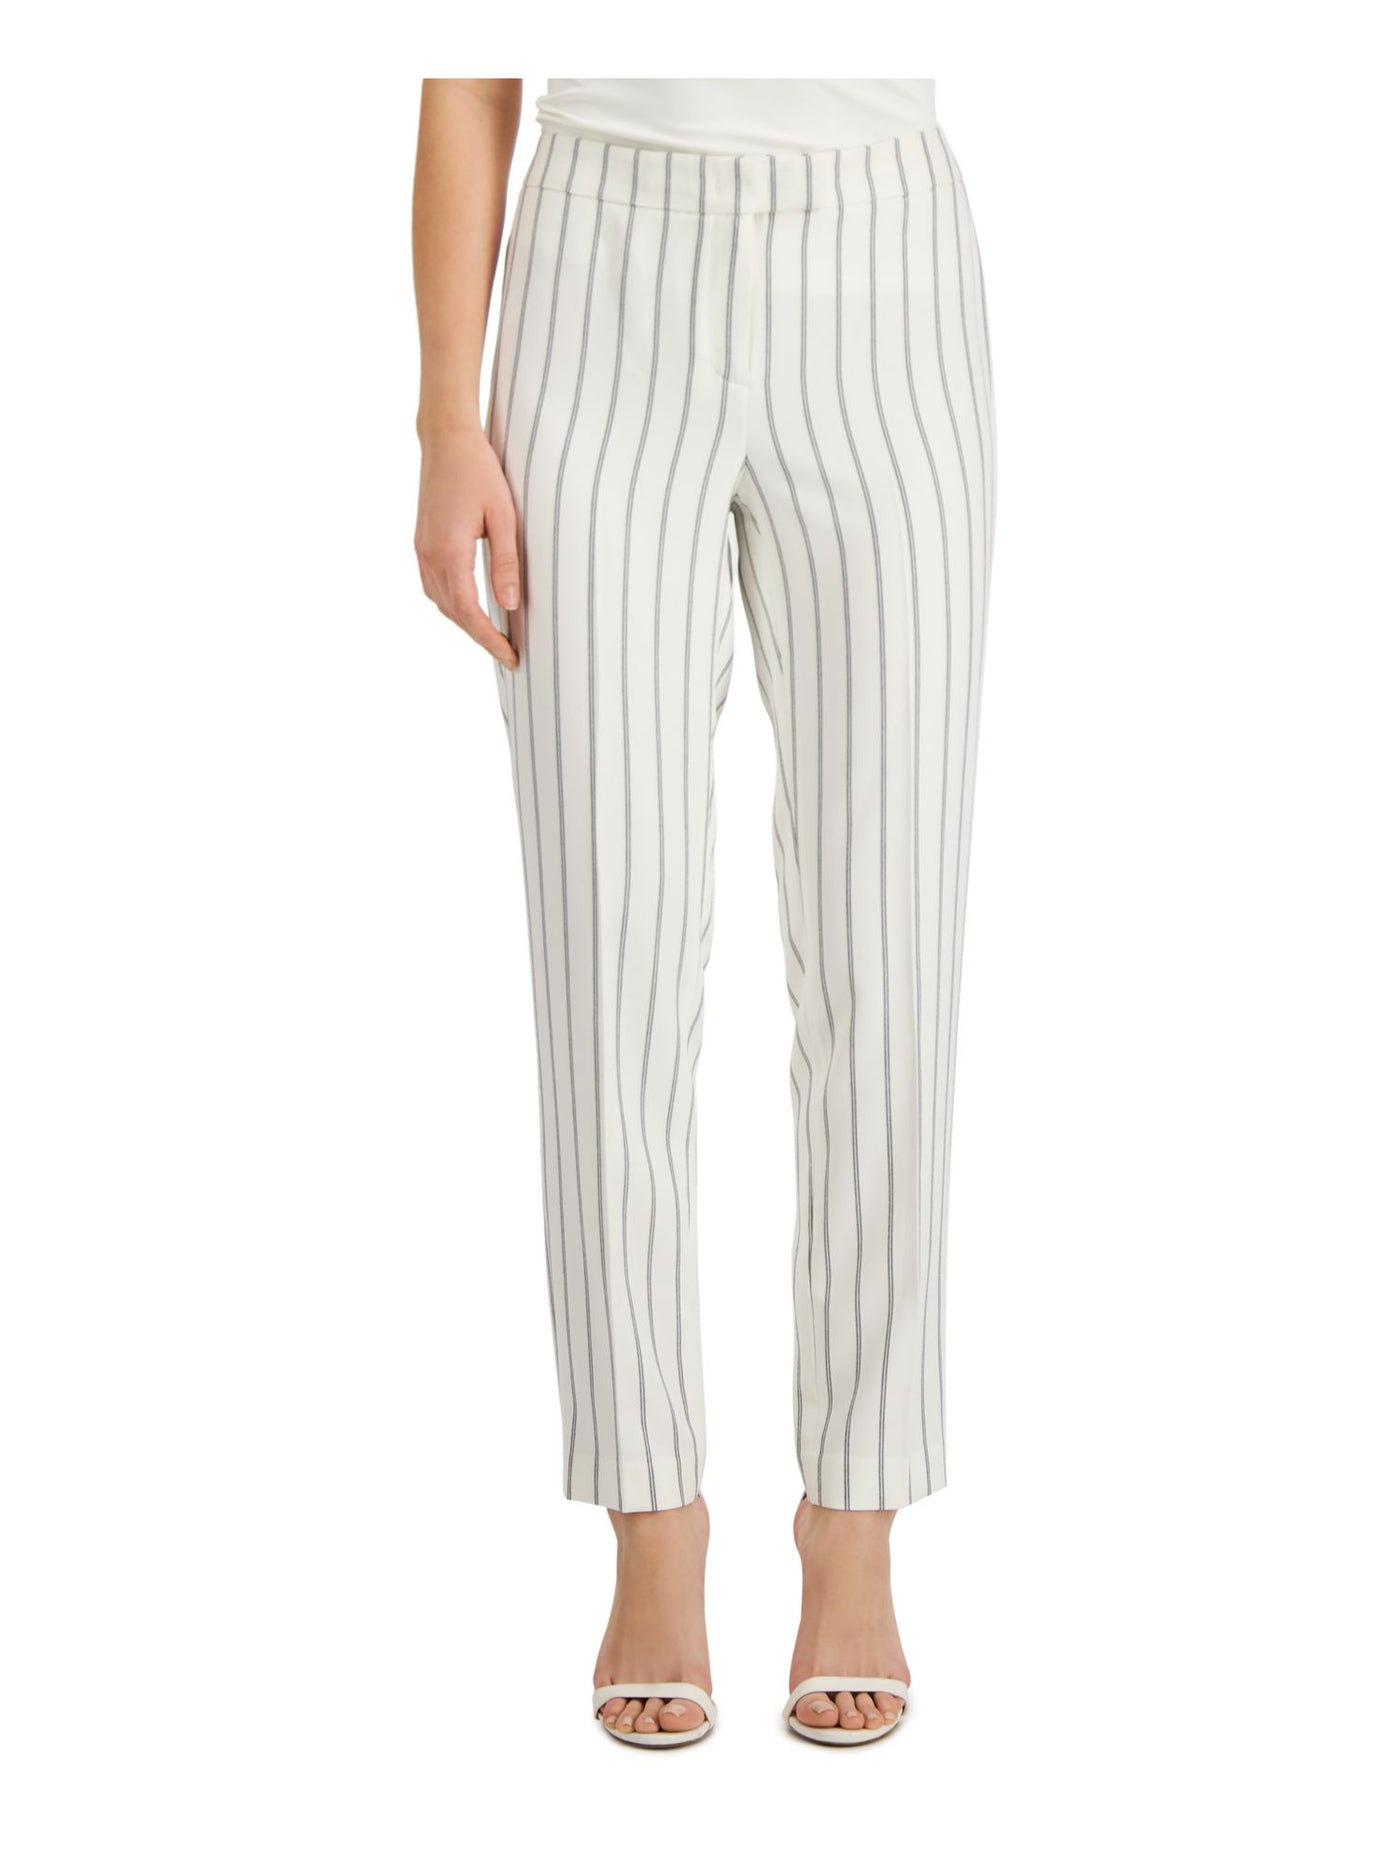 ANNE KLEIN Womens White Pocketed Hook And Bar Closure Extend-tab Striped Wear To Work Straight leg Pants 10